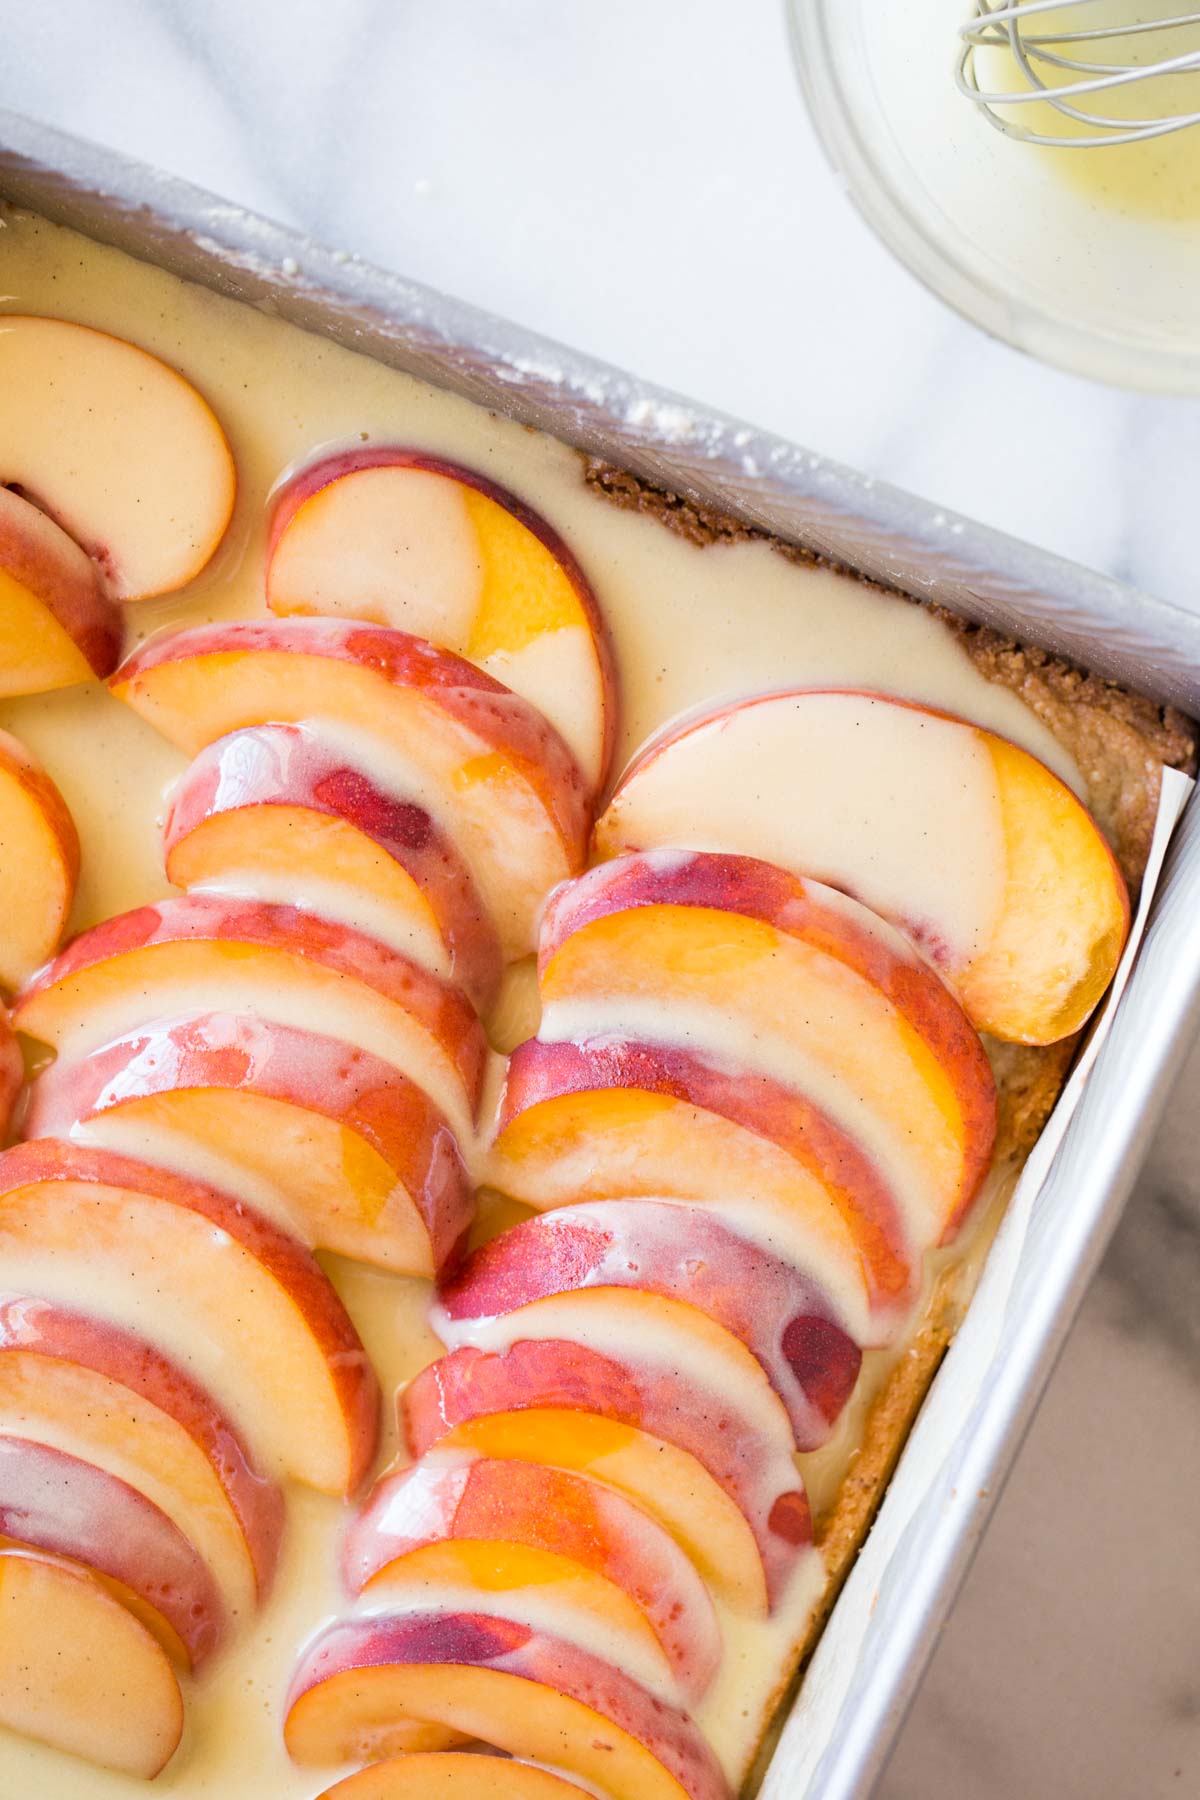 Peaches and Cream Shortbread Bars assembled in a baking dish prior to baking. 